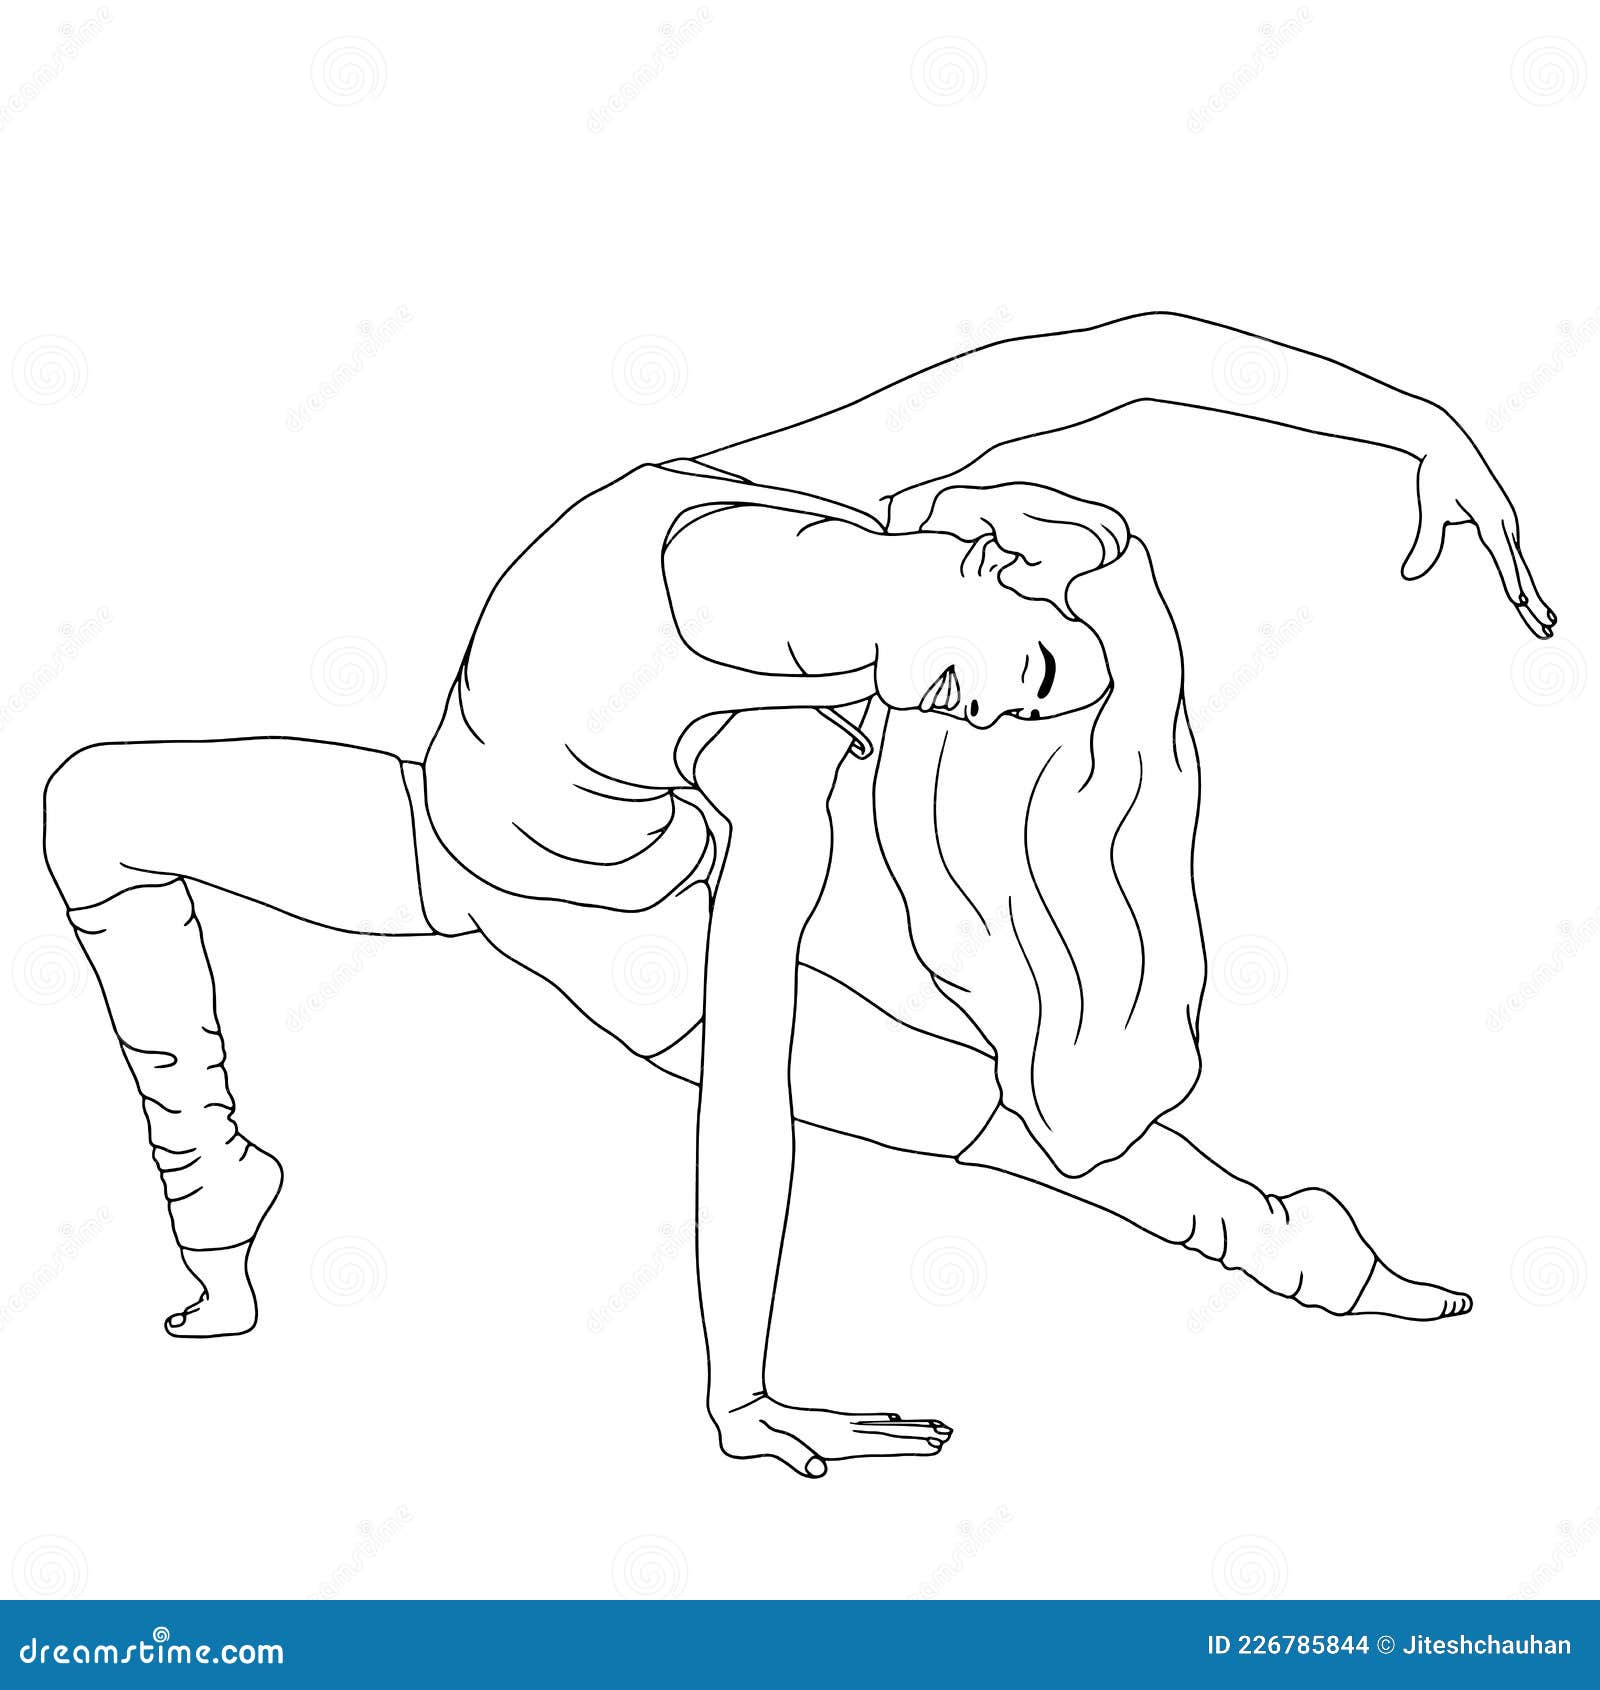 Pin by Ellie Valdez on yoga and stuff | Yoga for kids, Yoga coloring book,  Mindfulness for kids